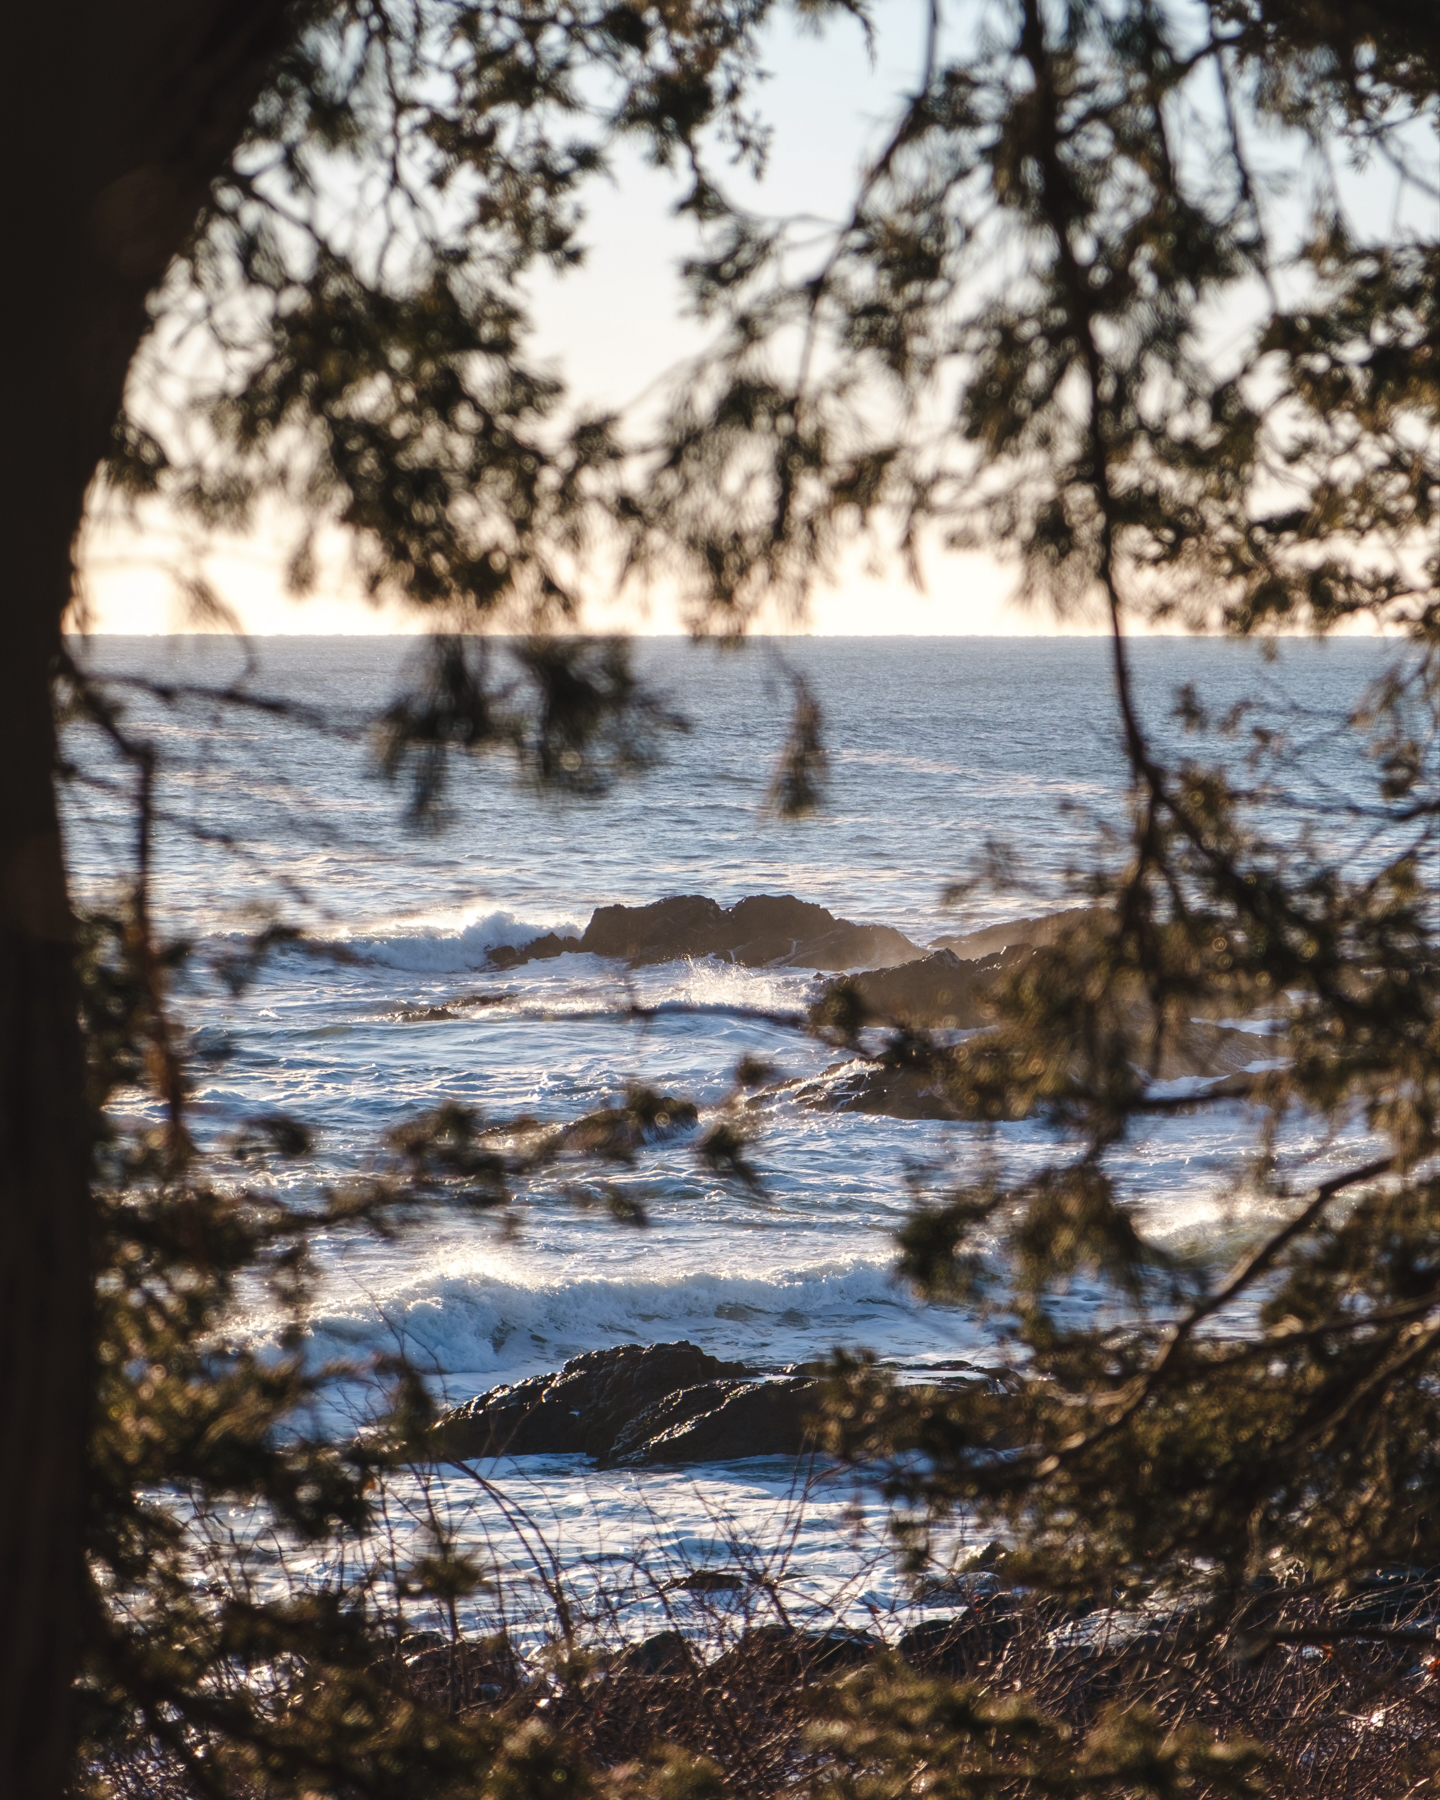 Seascape view through tree branches with waves crashing against rocks.